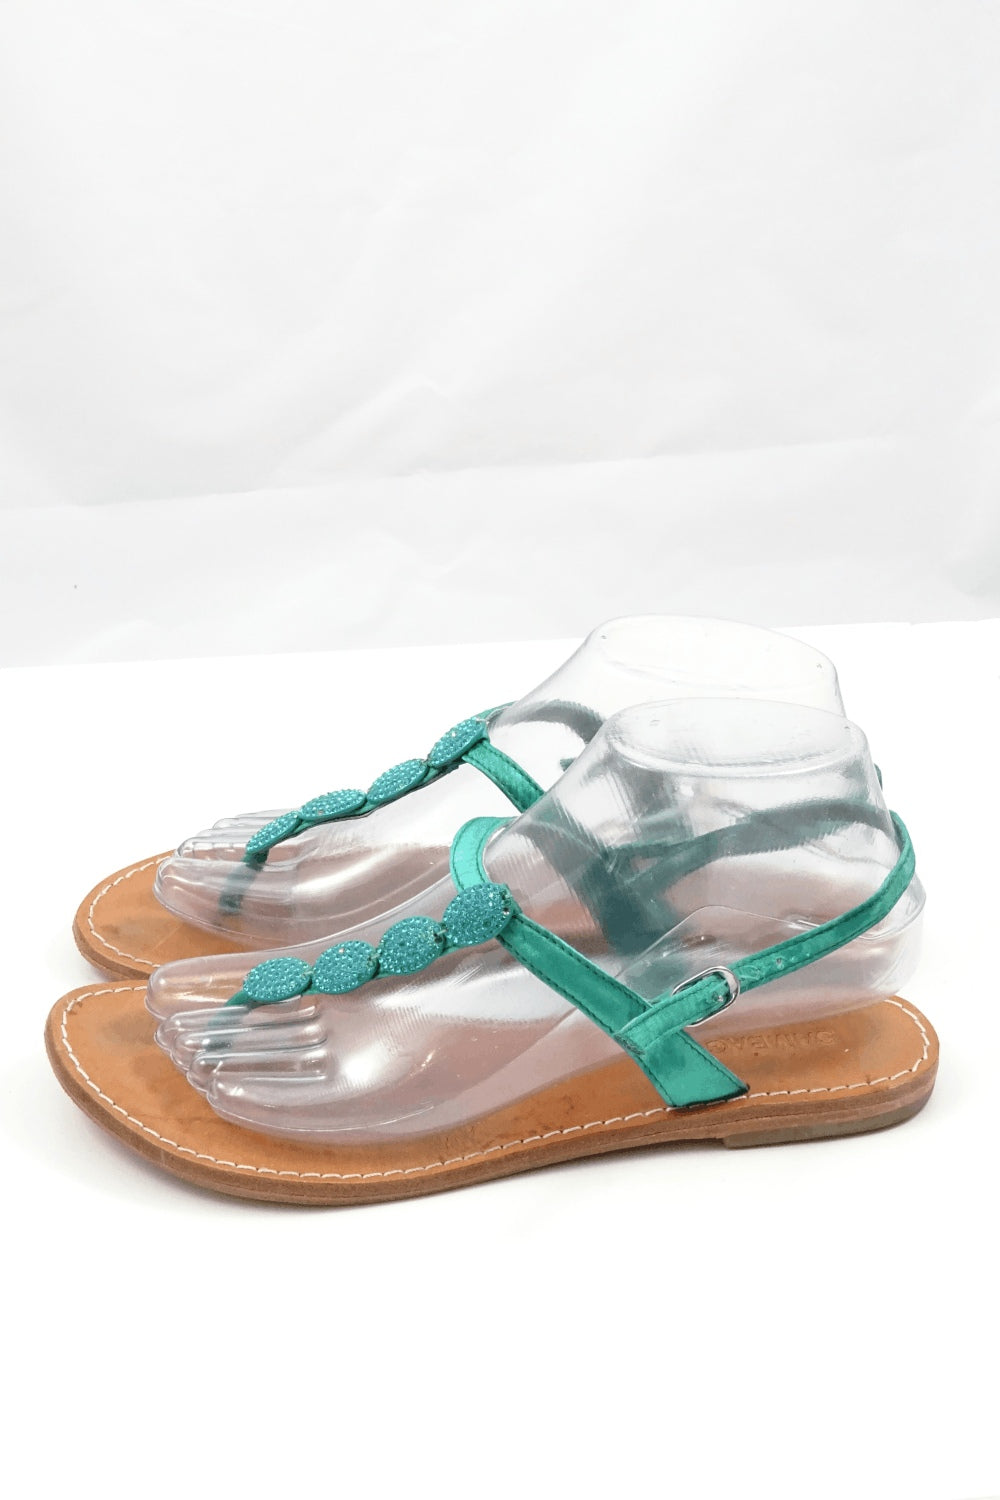 Turquoise Sandals with oval diamante detailing